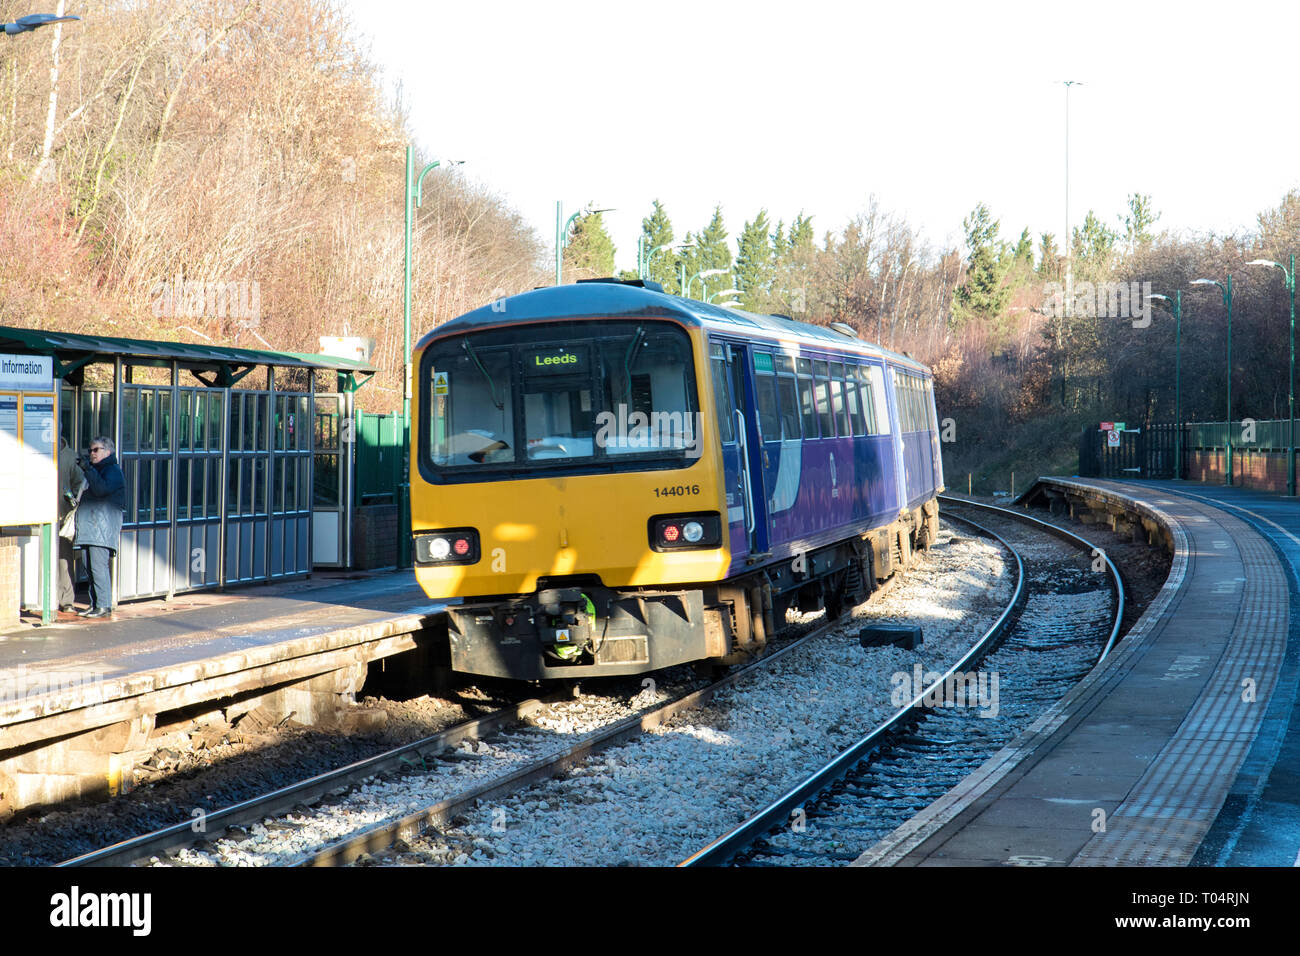 A Leeds bound pacer train Stock Photo